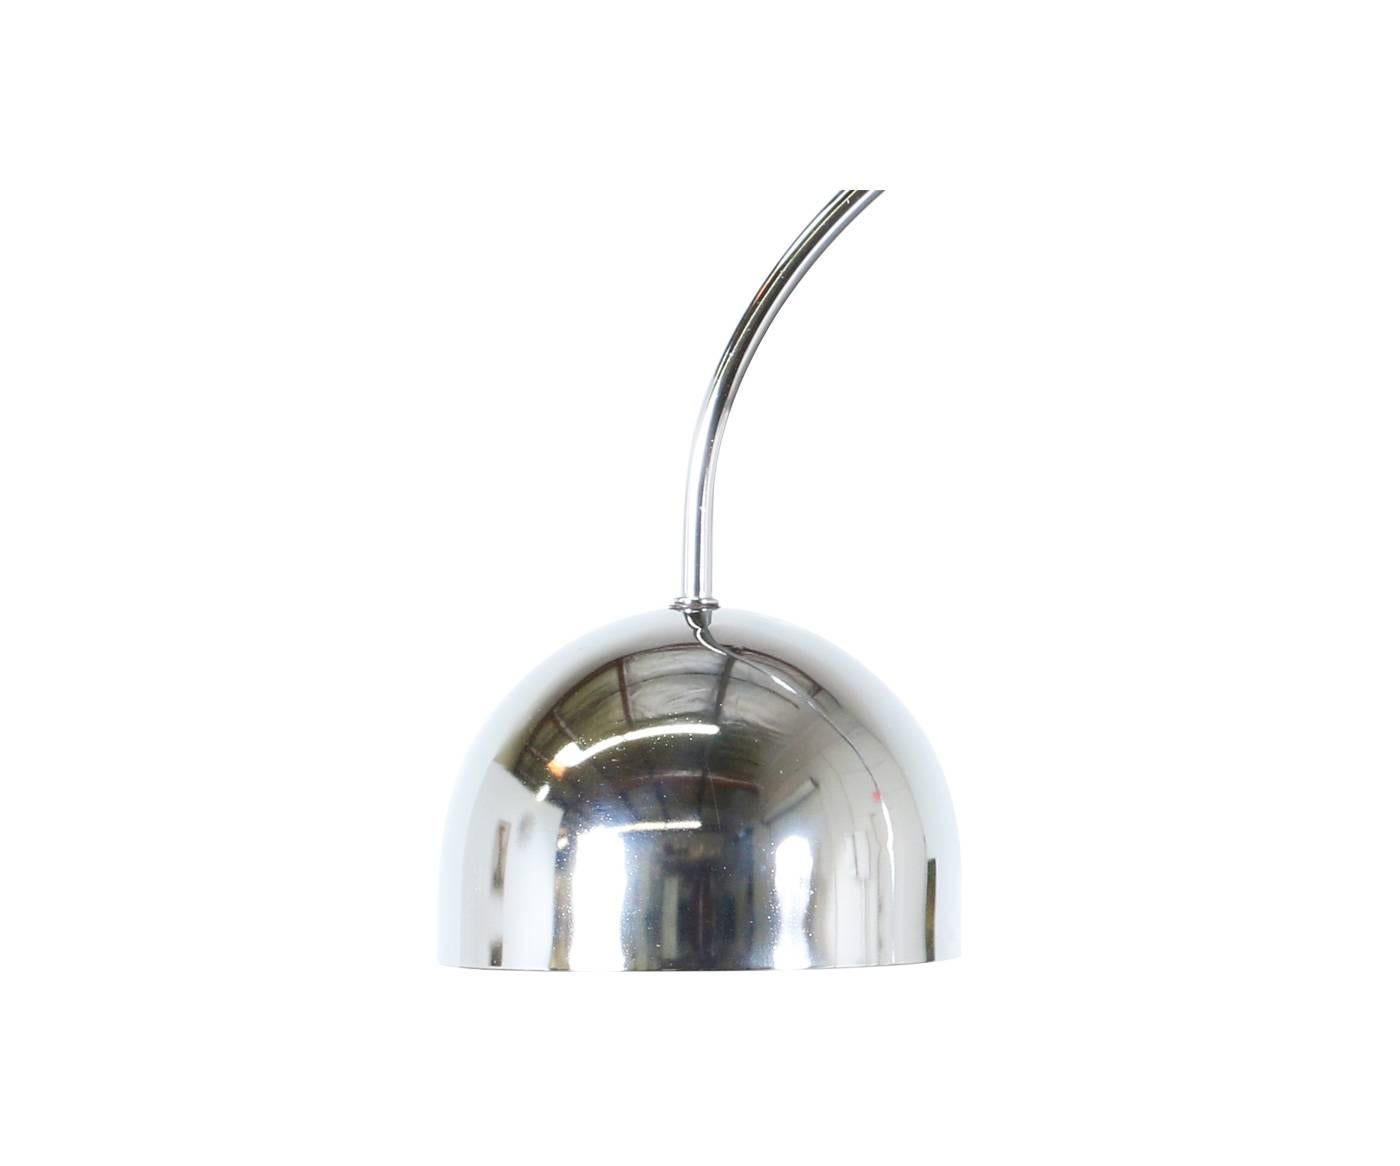 Designer: Harvey Guzzini
Manufacturer: Laurel Lighting Inc.
Period/Style: Mid Century Modern
Country: Italy
Date: 1970’s

Dimensions: 24″H x 5″W x 5″W
Materials: Polished Chrome, Travertine Marble
Condition: Shows minor wear consistent with